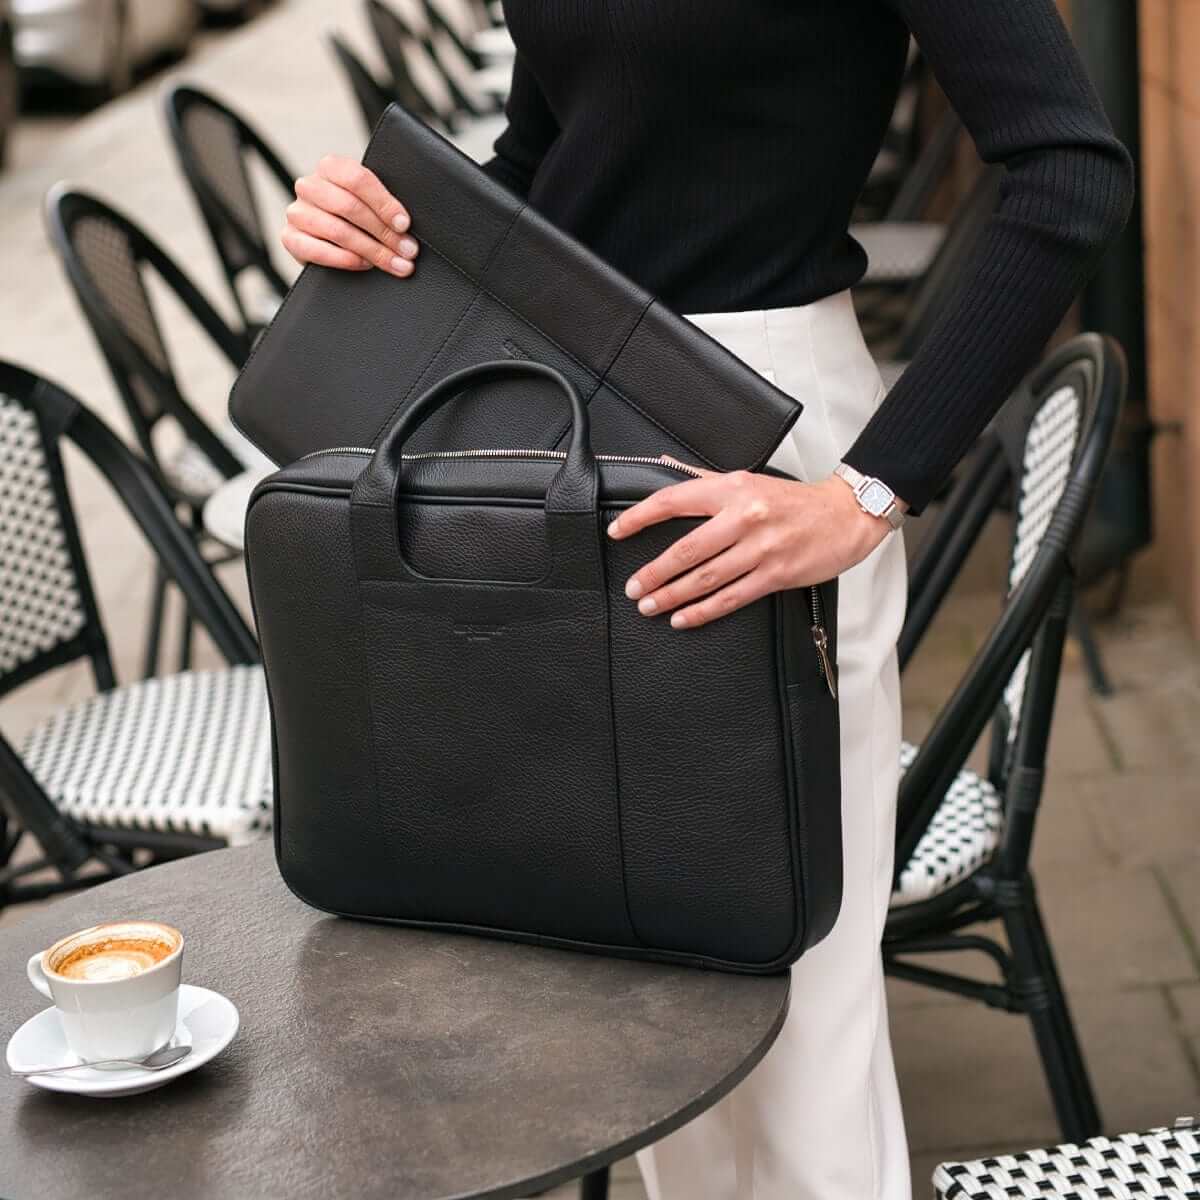 Detailed craftsmanship of the Arsante Classic Briefcase, made in a Nordic atelier, showcasing high durability cotton lining and Italian polished Raccagni zippers